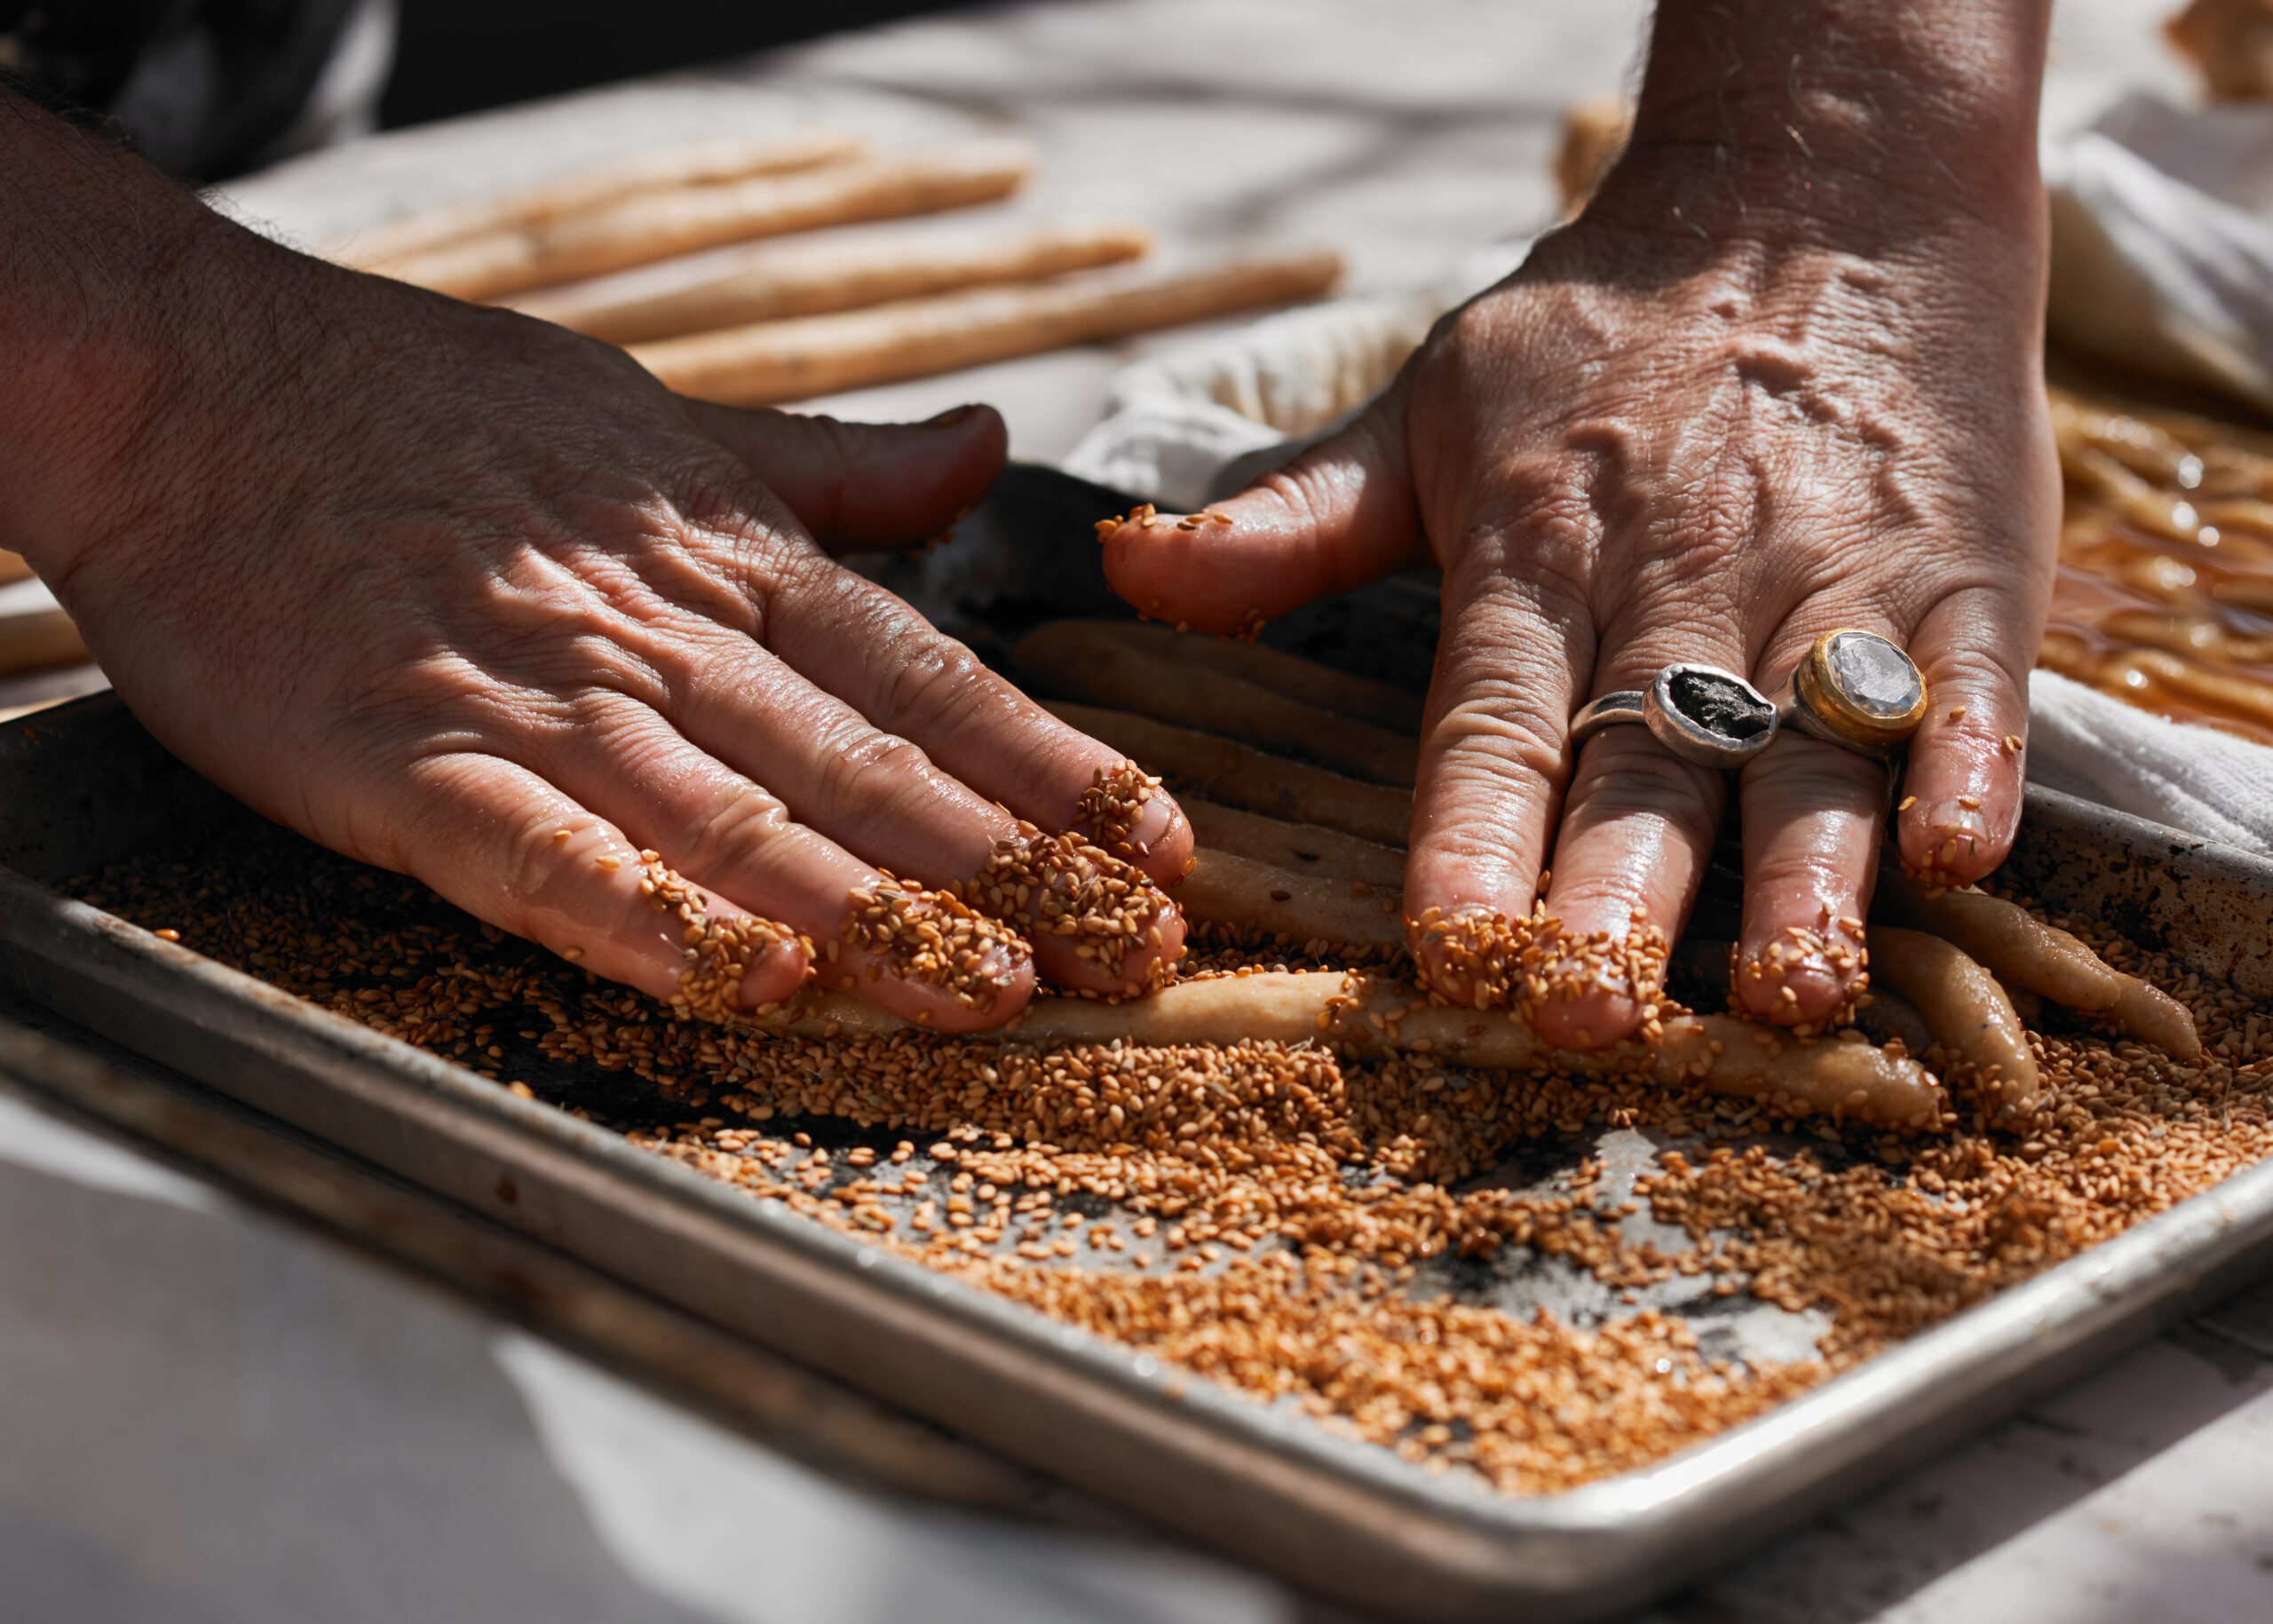 Hands with rinks atop baking tray with dough logs and sesame seeds